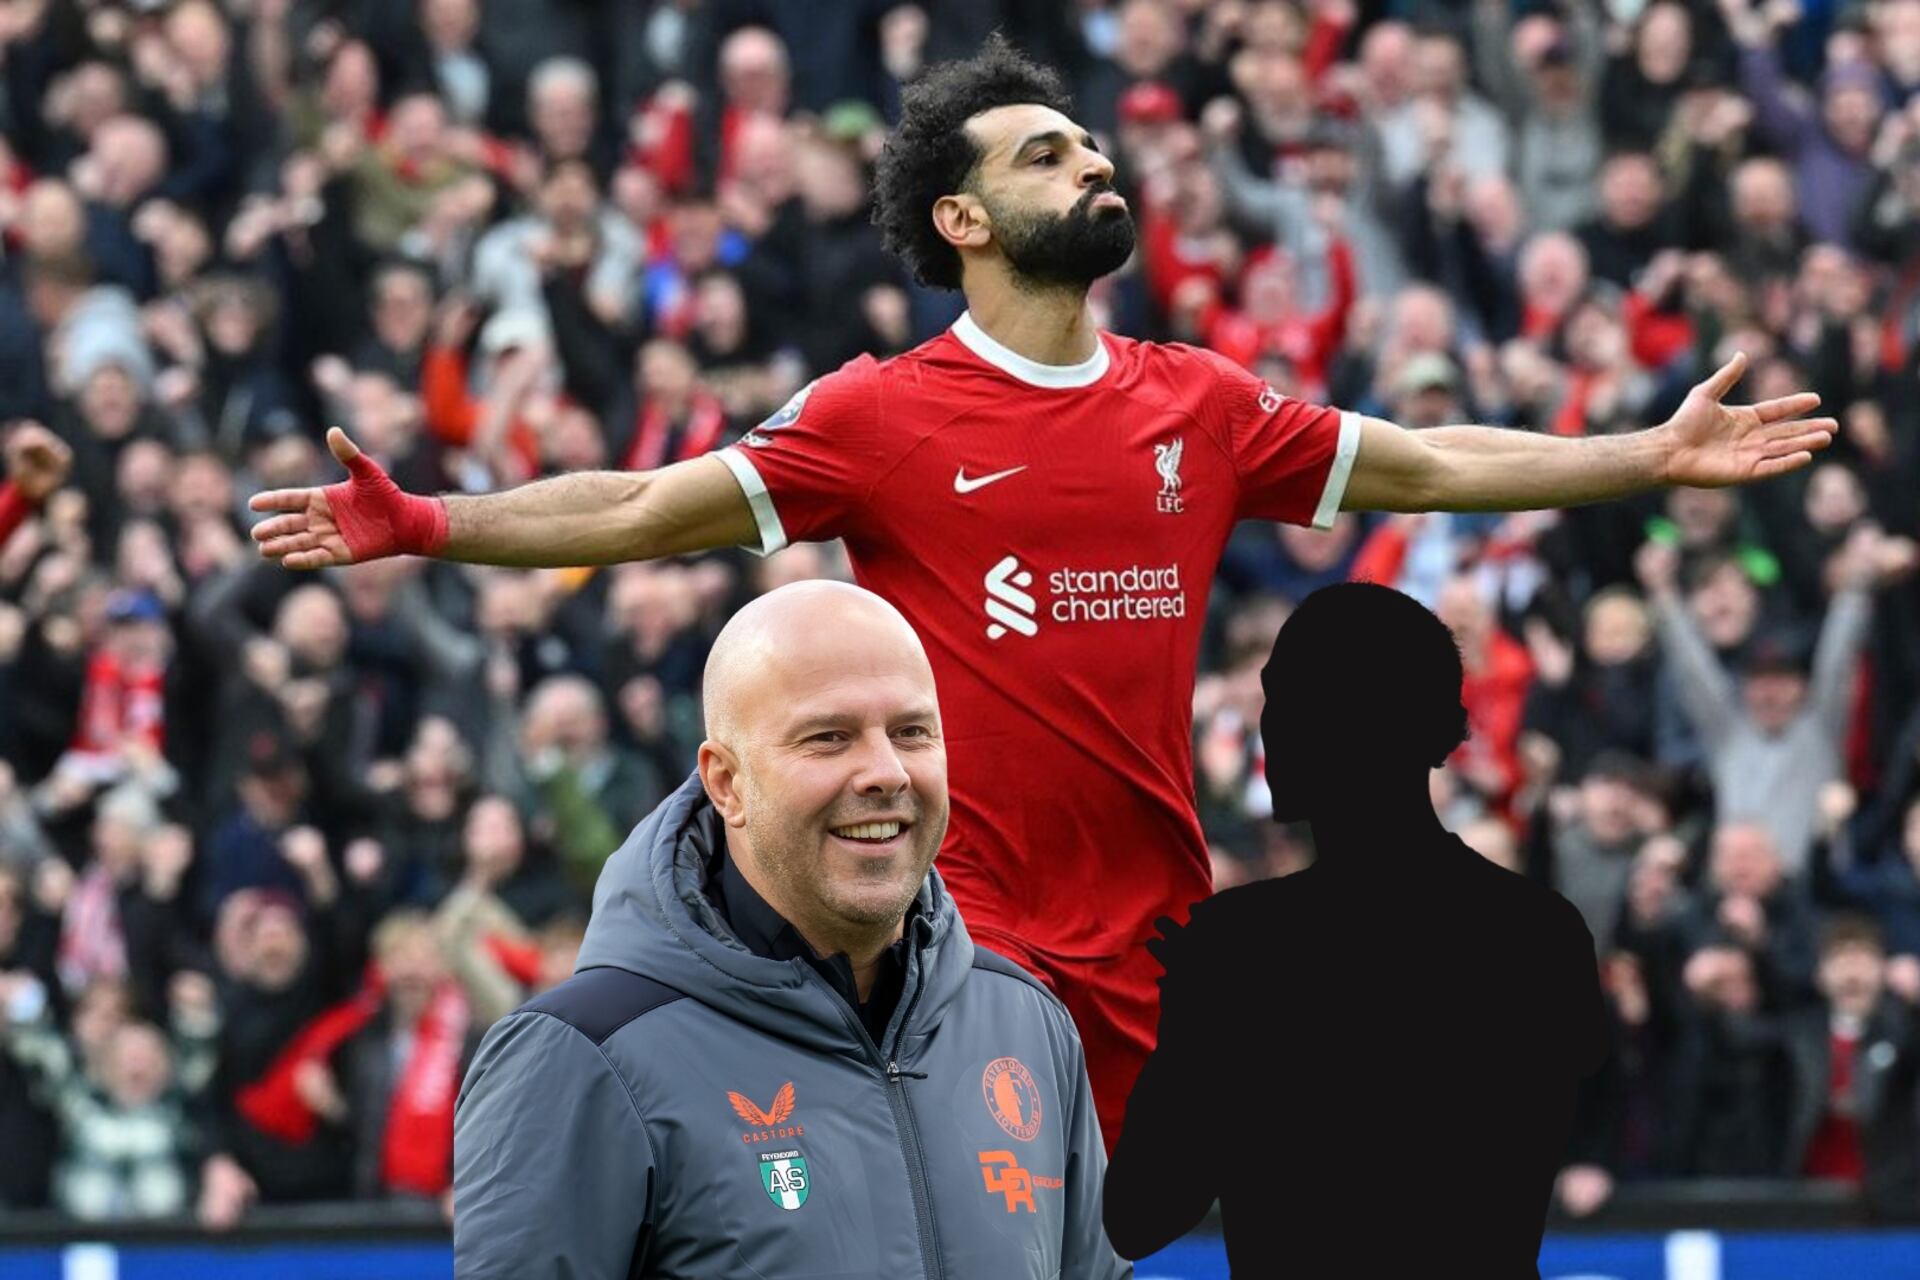 Not even Salah, it was Arne Slot's first demand at Liverpool and the untouchable player in the sqaud